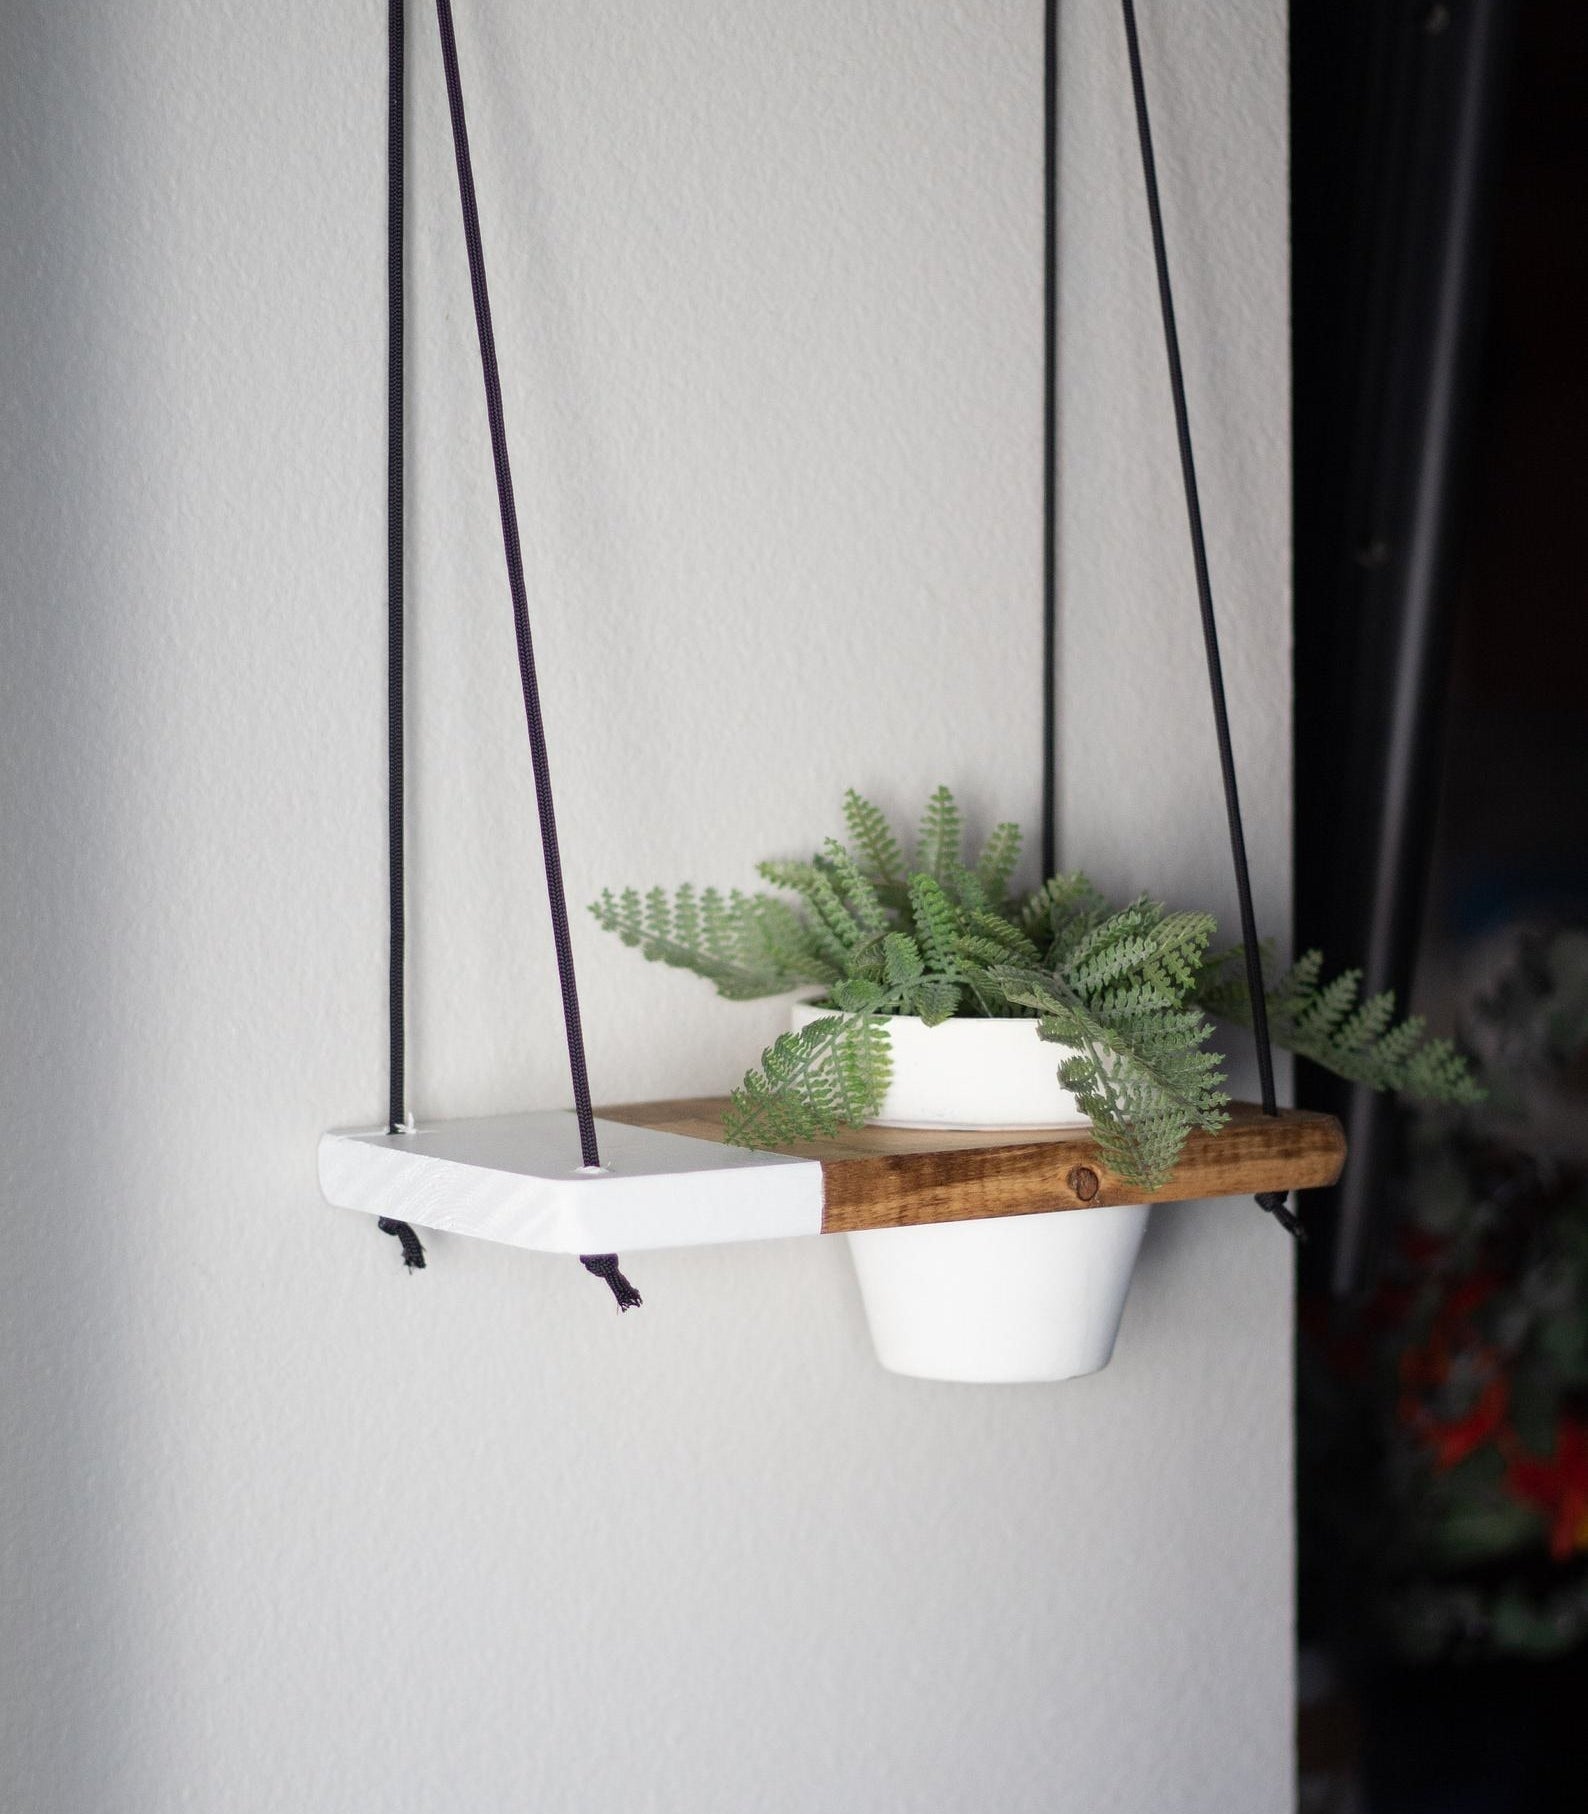 A piece of wood with a hole in the right side with a potted plant in it and a quarter of the left side painted white with black rope connecting it to the wall